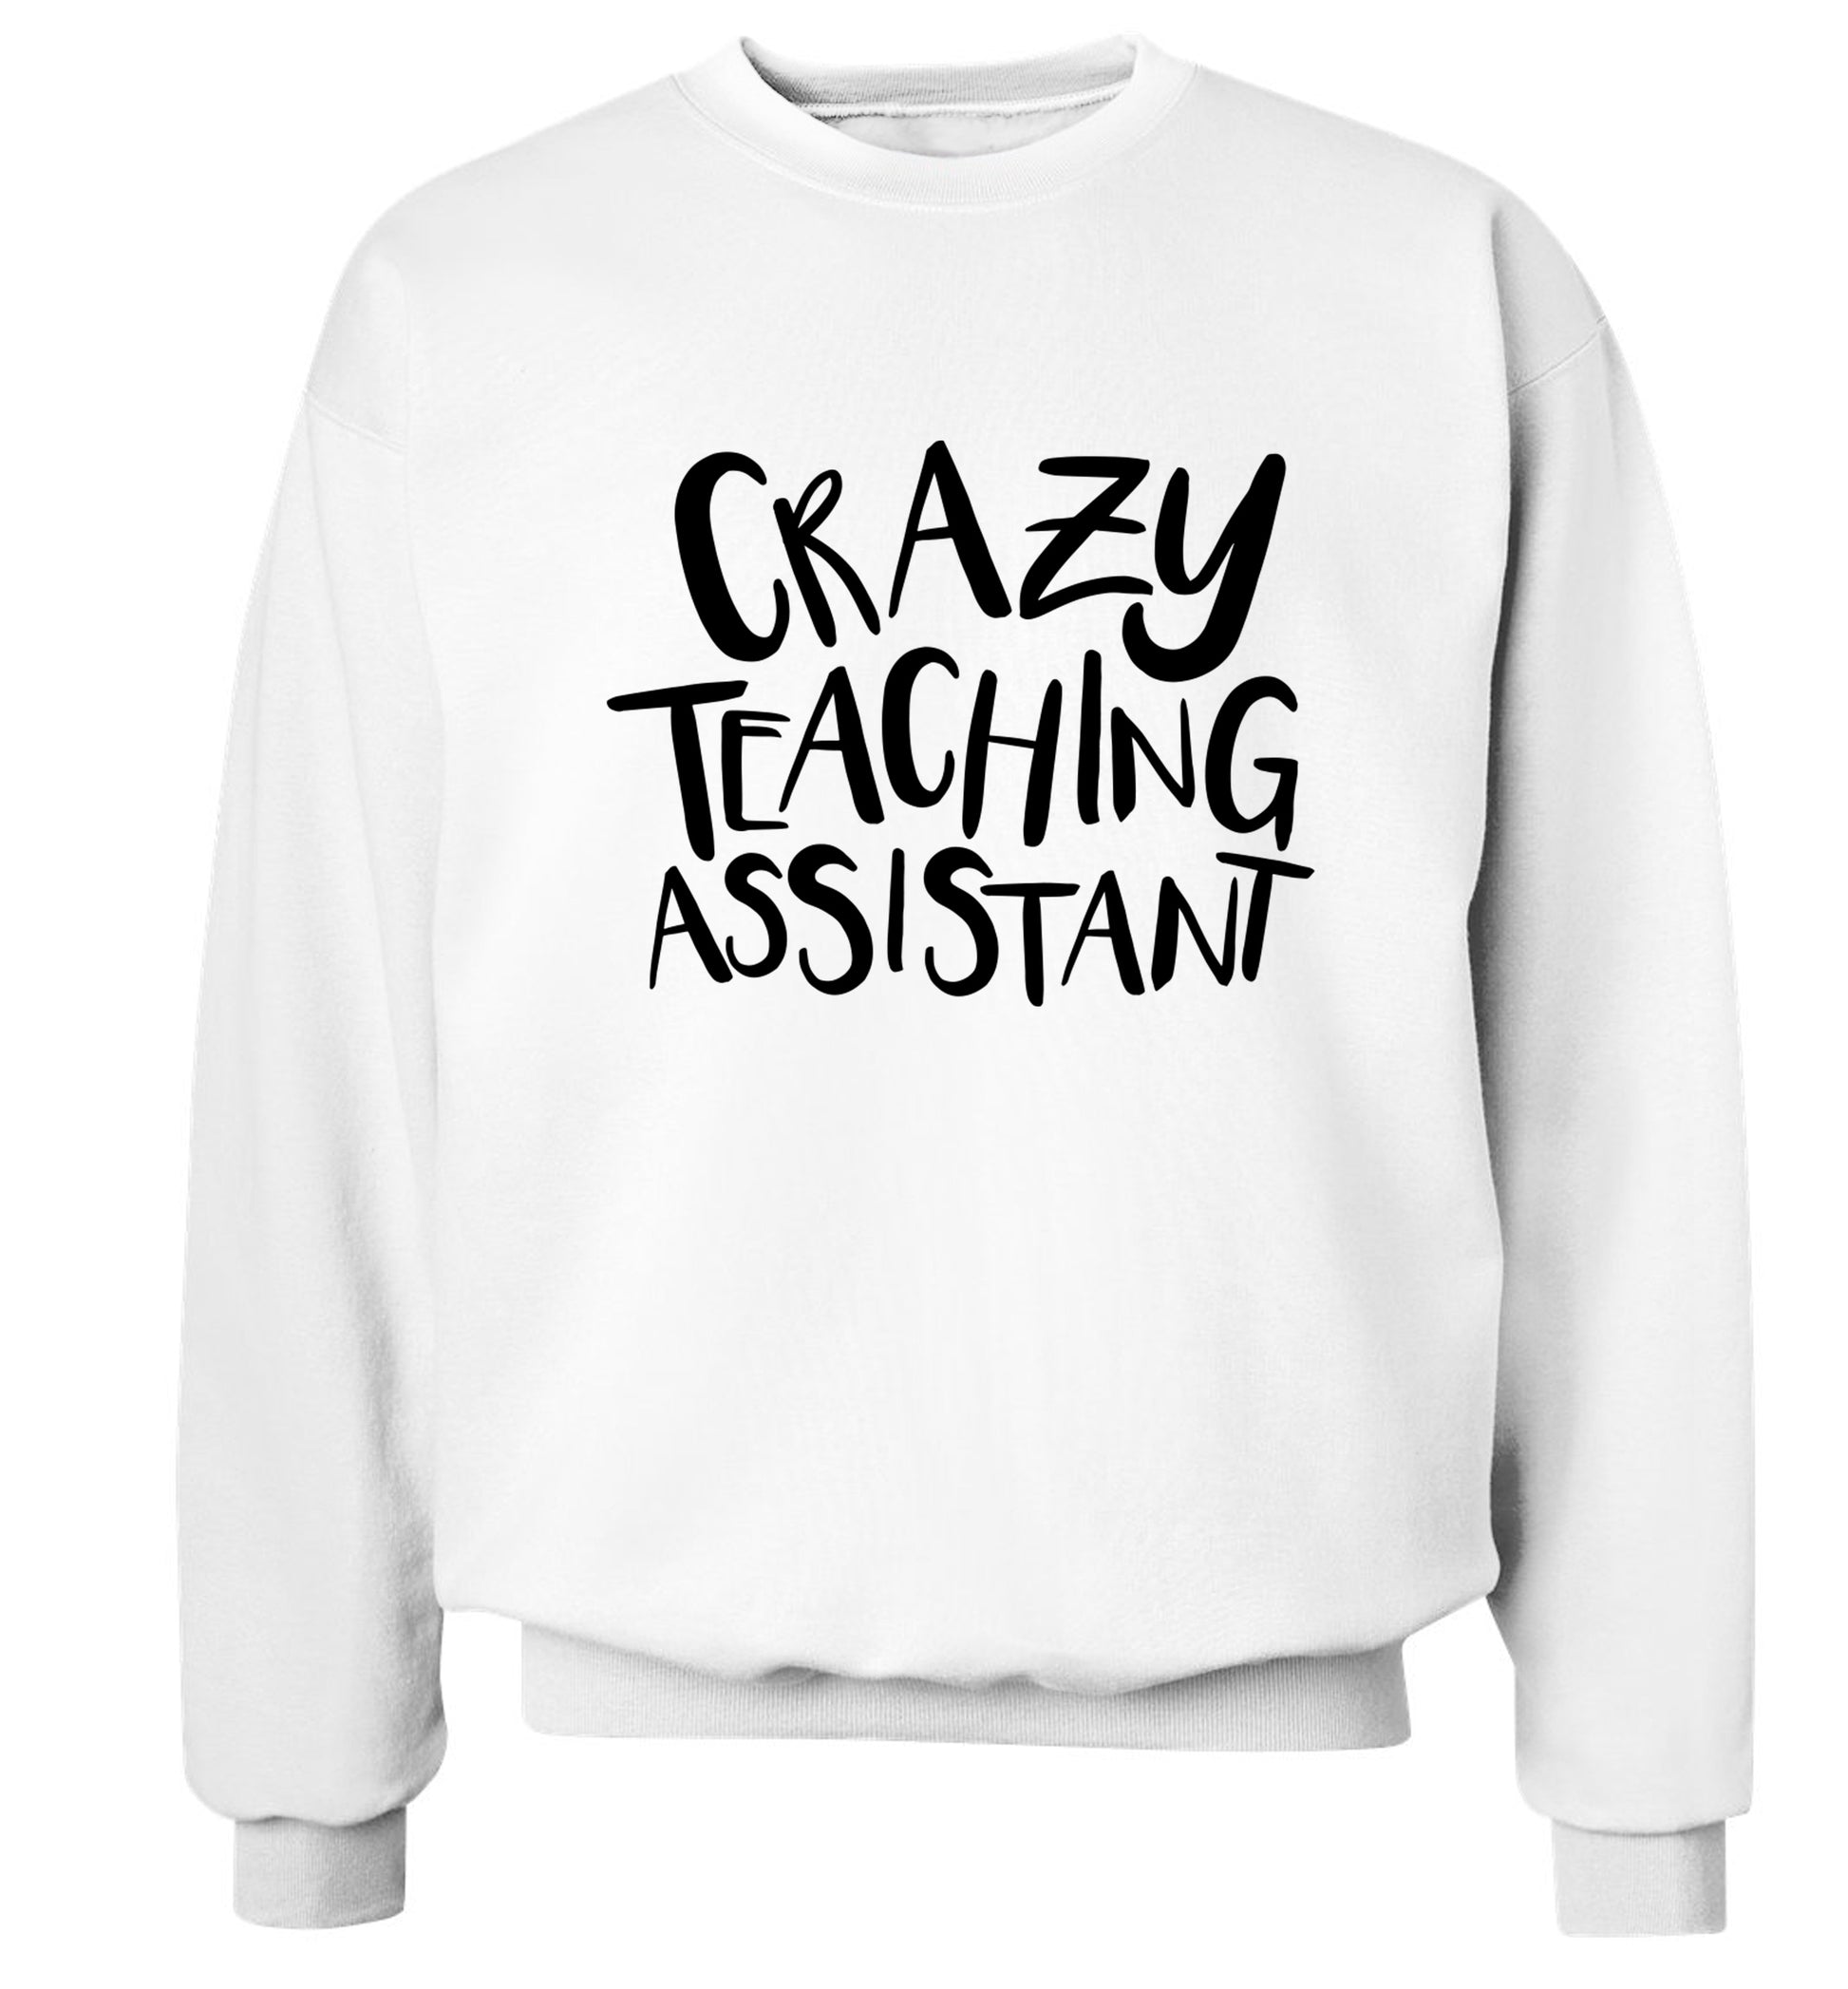 Crazy Teaching Assistant Adult's unisex white Sweater 2XL